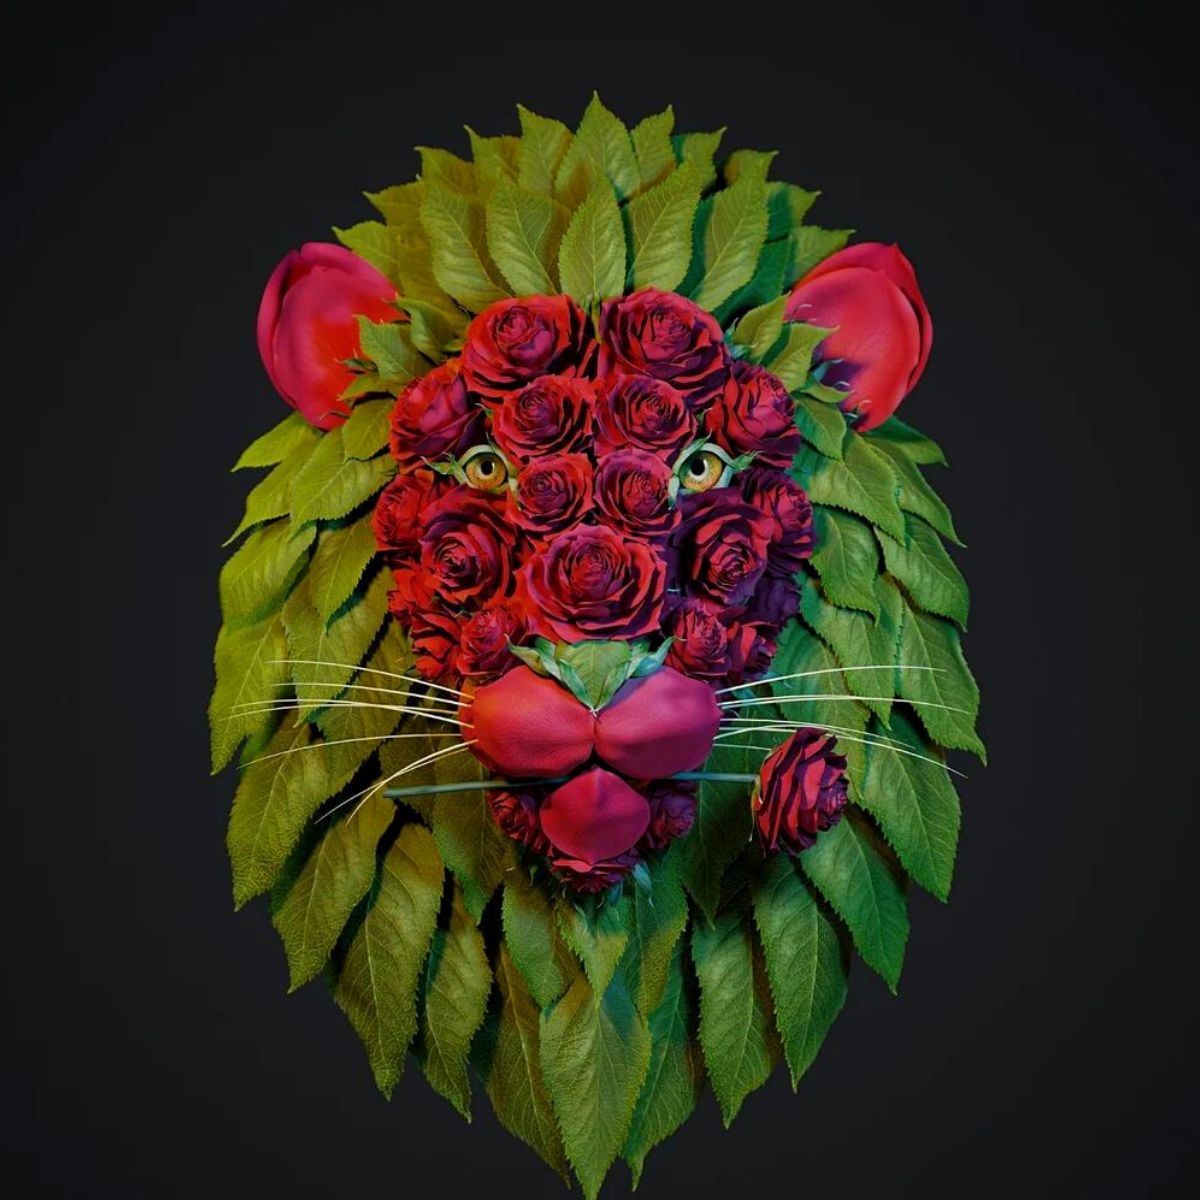 Reikan Creations - Amazing lion made with red roses and leaves